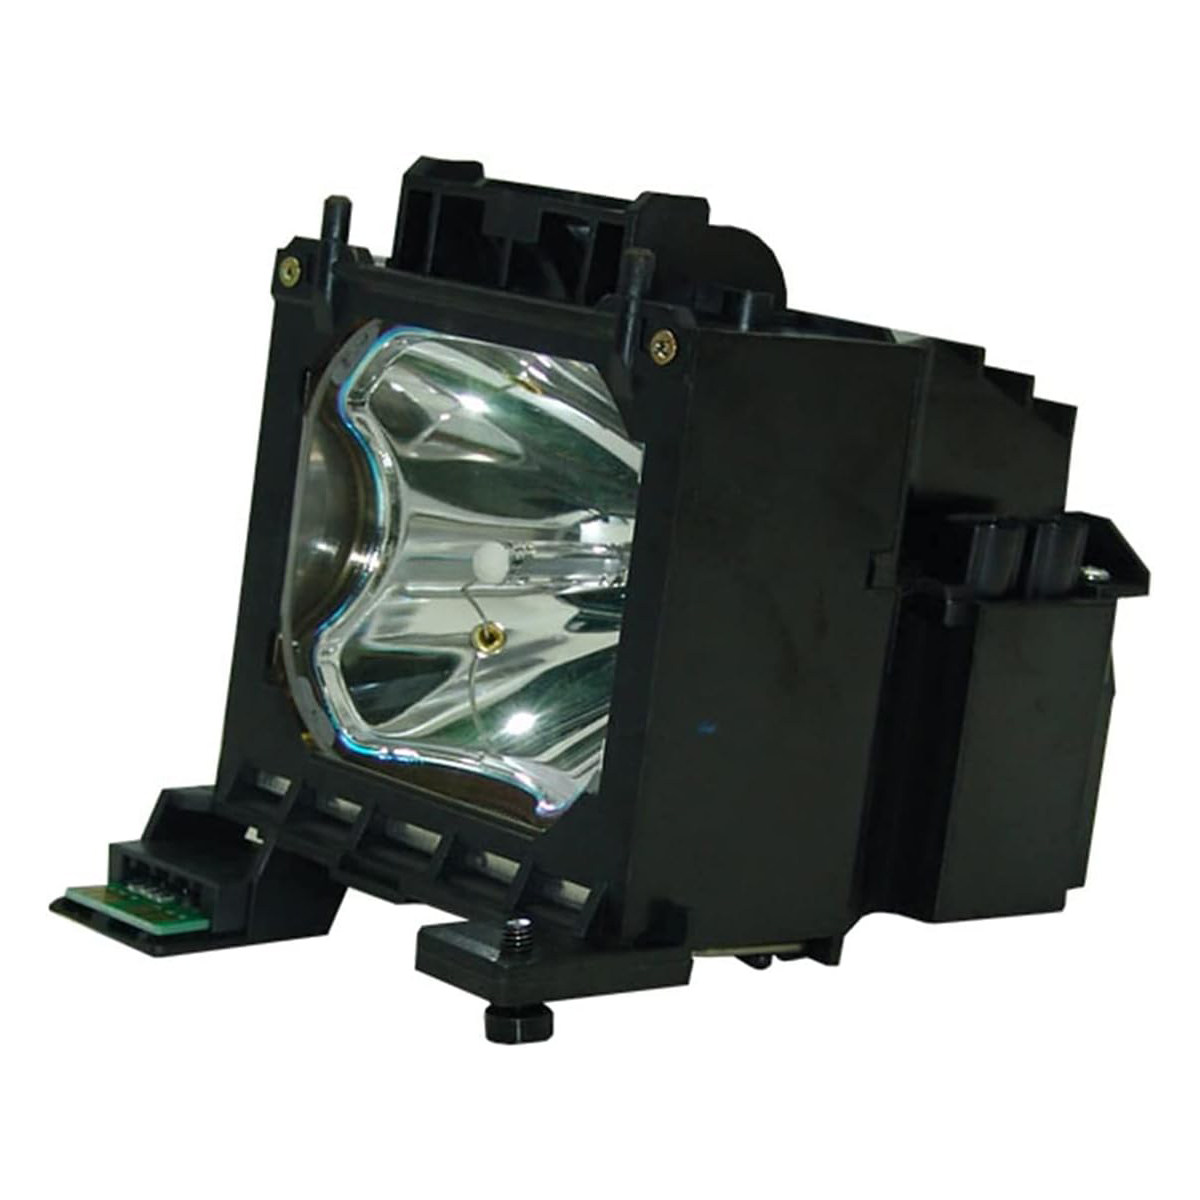 Replacement Projector lamp 456-8805 For Dukane Projector